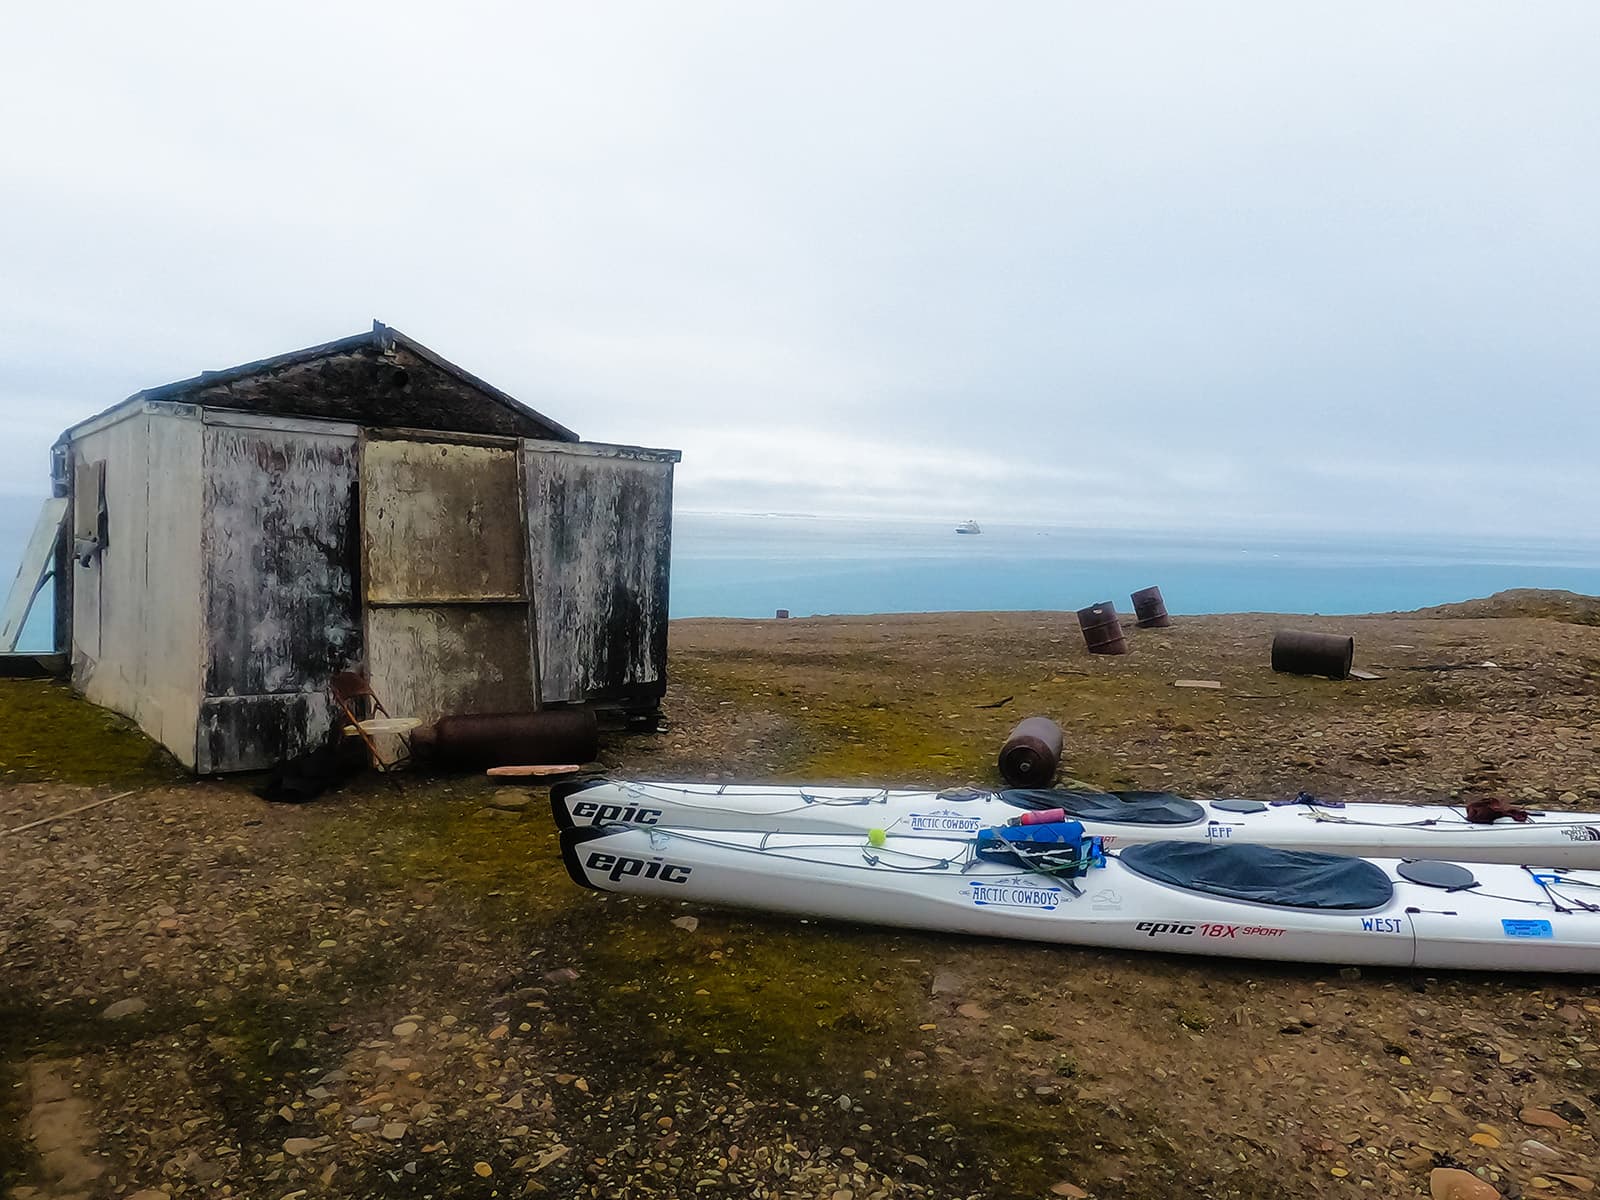 North West Passage by Kayak - abandoned hunting hut